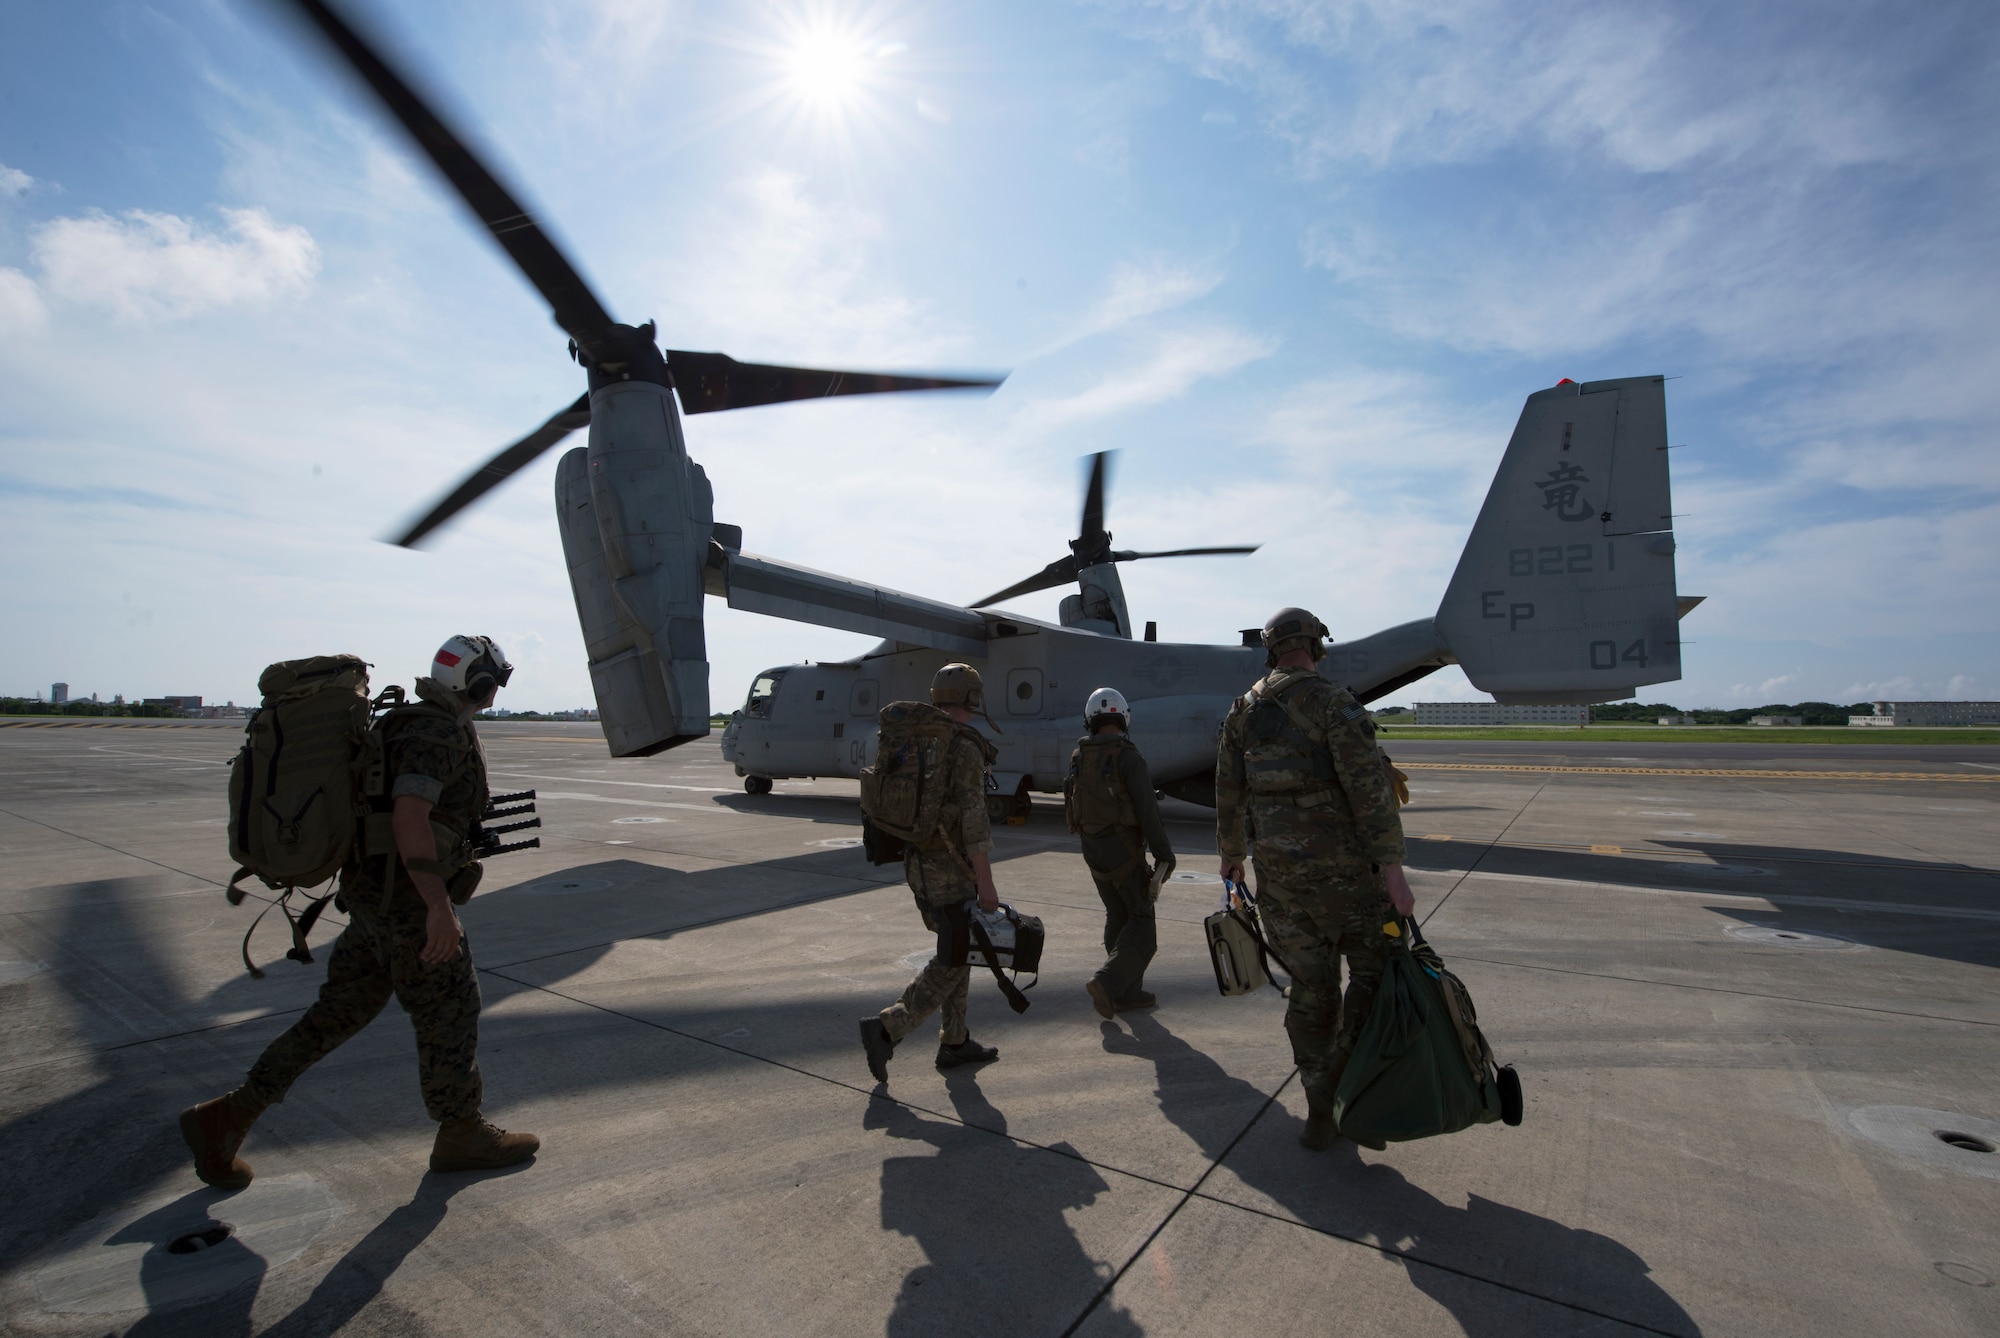 Members of the U.S. Air Force, Navy and Marines, board an MV-22 Osprey June 6, 2018, at Marine Corps Air Station, Okinawa, Japan during an exercise. The Air Force performs joint medical exercises with other U.S. forces regularly in Okinawa to better prepare service members for real world emergencies. (U.S. Air Force photo by Senior Airman Thomas Barley)